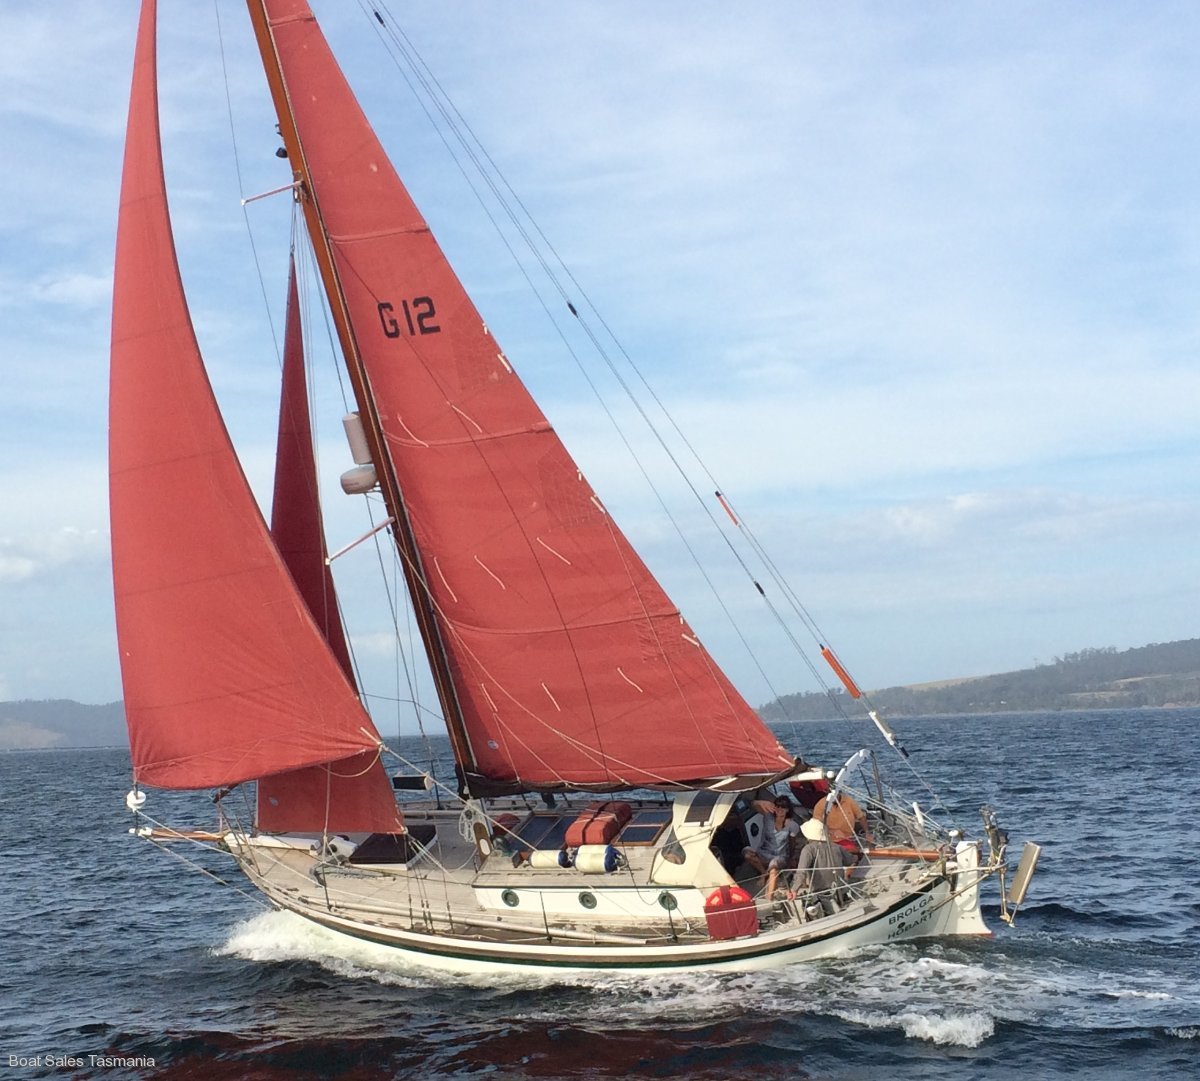 32 ft sailing yachts for sale uk